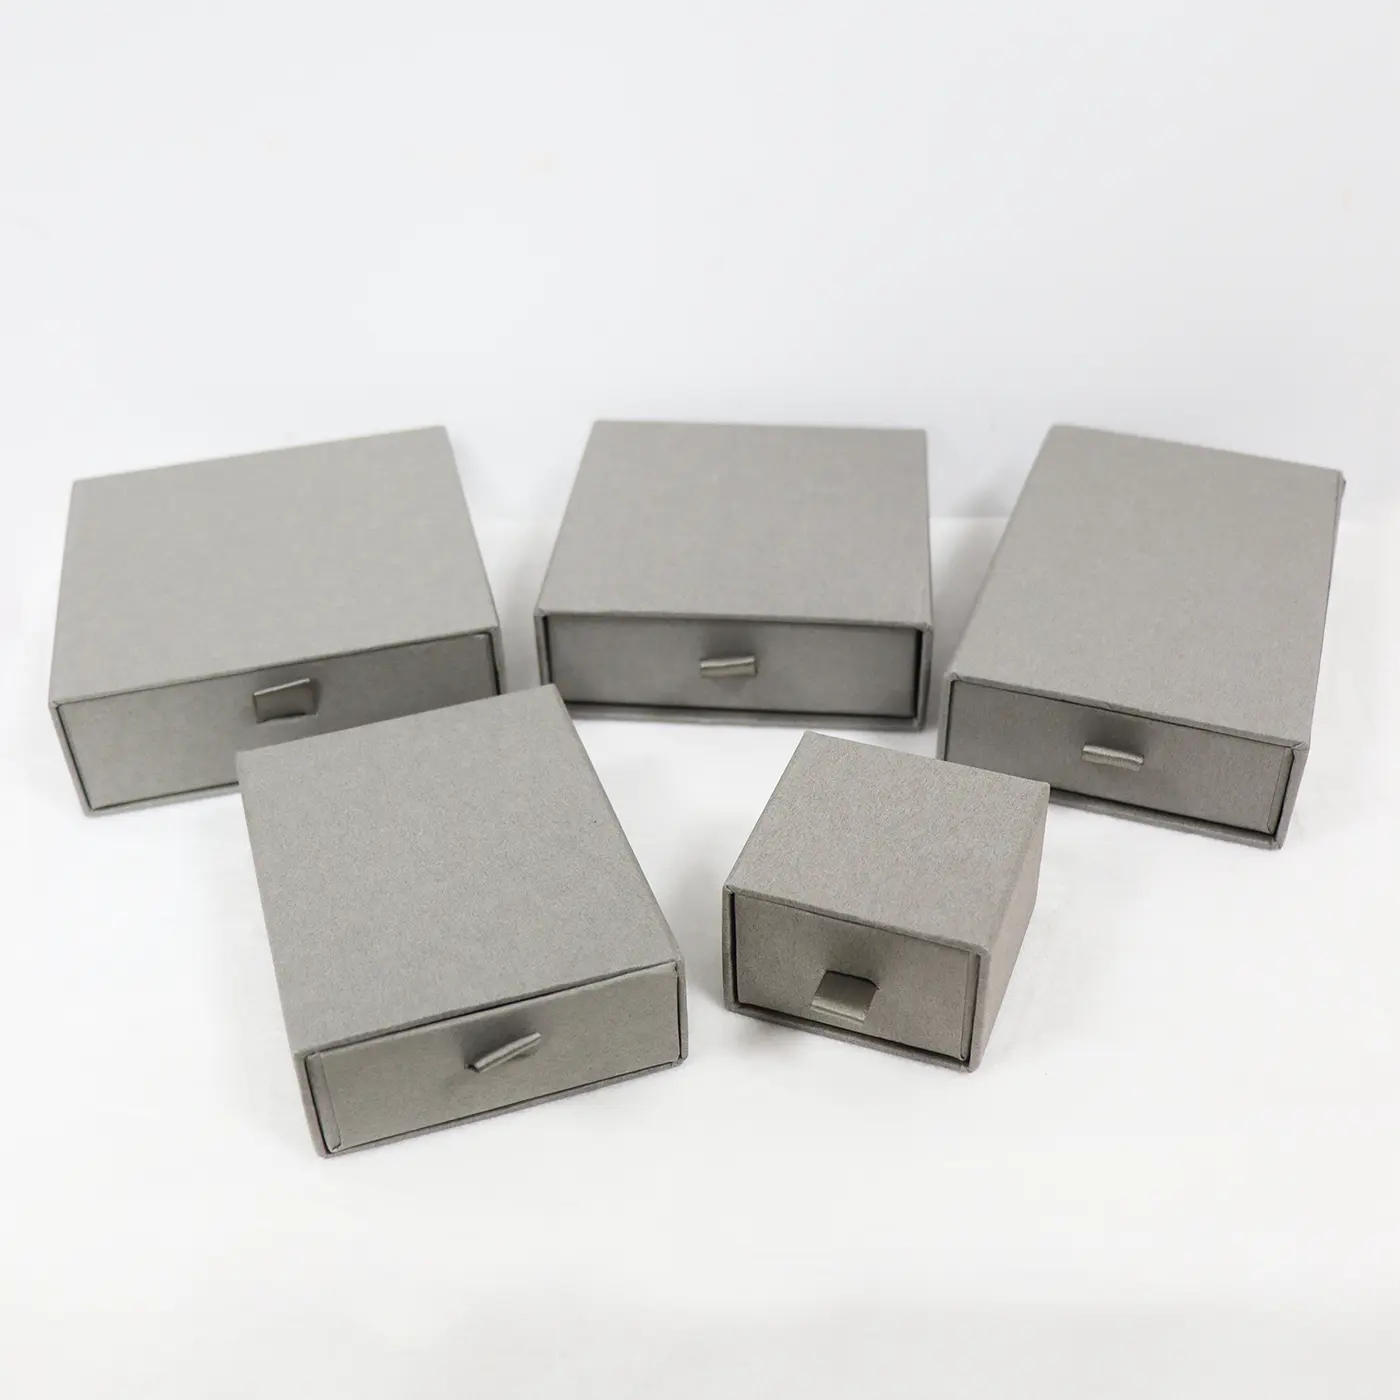 Custom paper small gift jewelry boxes packaging. small cardboard box for jewelry packaging